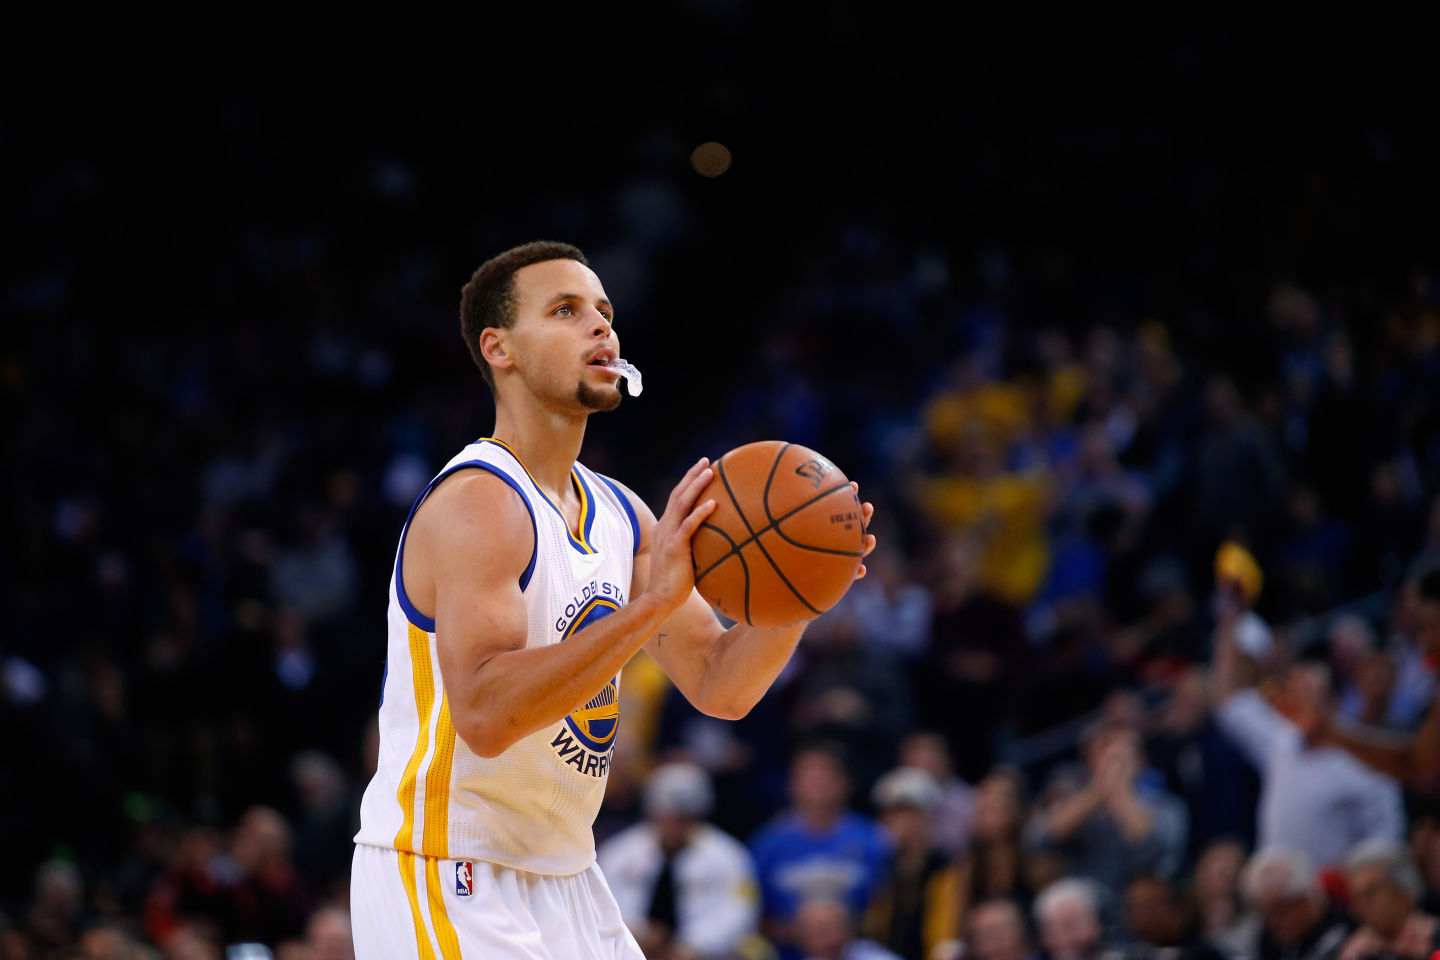 Stephen Curry shoots a free throw against the Detroit Pistons at Oracle Arena on Nov. 9, 2015.  Ezra Shaw/Getty Images